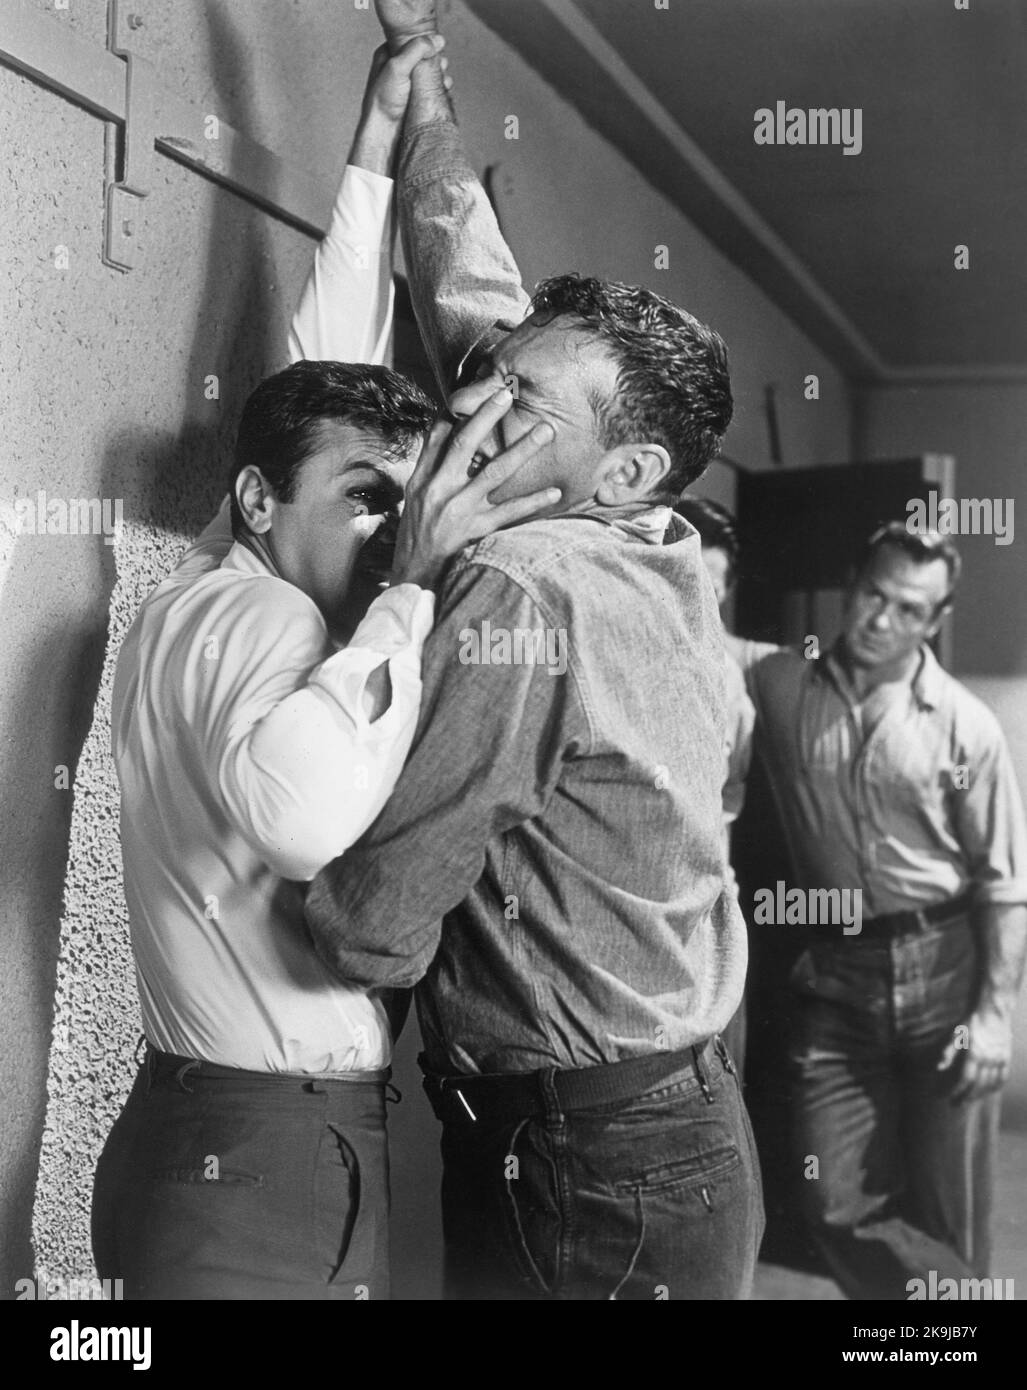 Tony Curtis, Mike Kellin, on-set of the Film, "The Great Impostor", Universal Pictures, 1960 Stock Photo